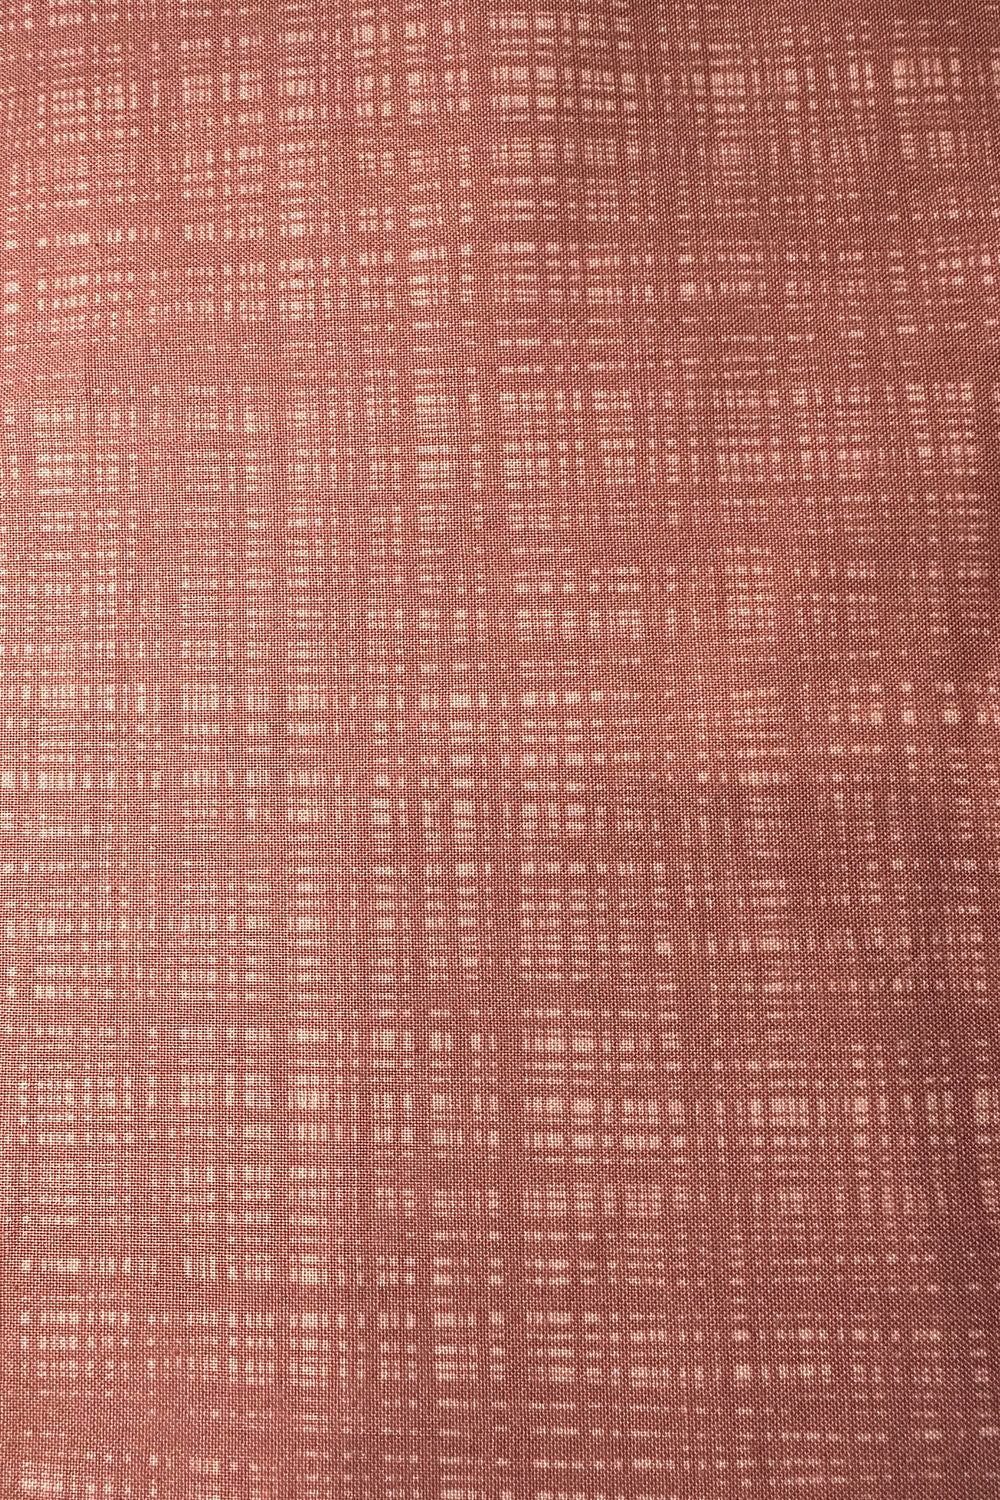 A Ghastile Weave in Mauve Cotton Fabric by the yard